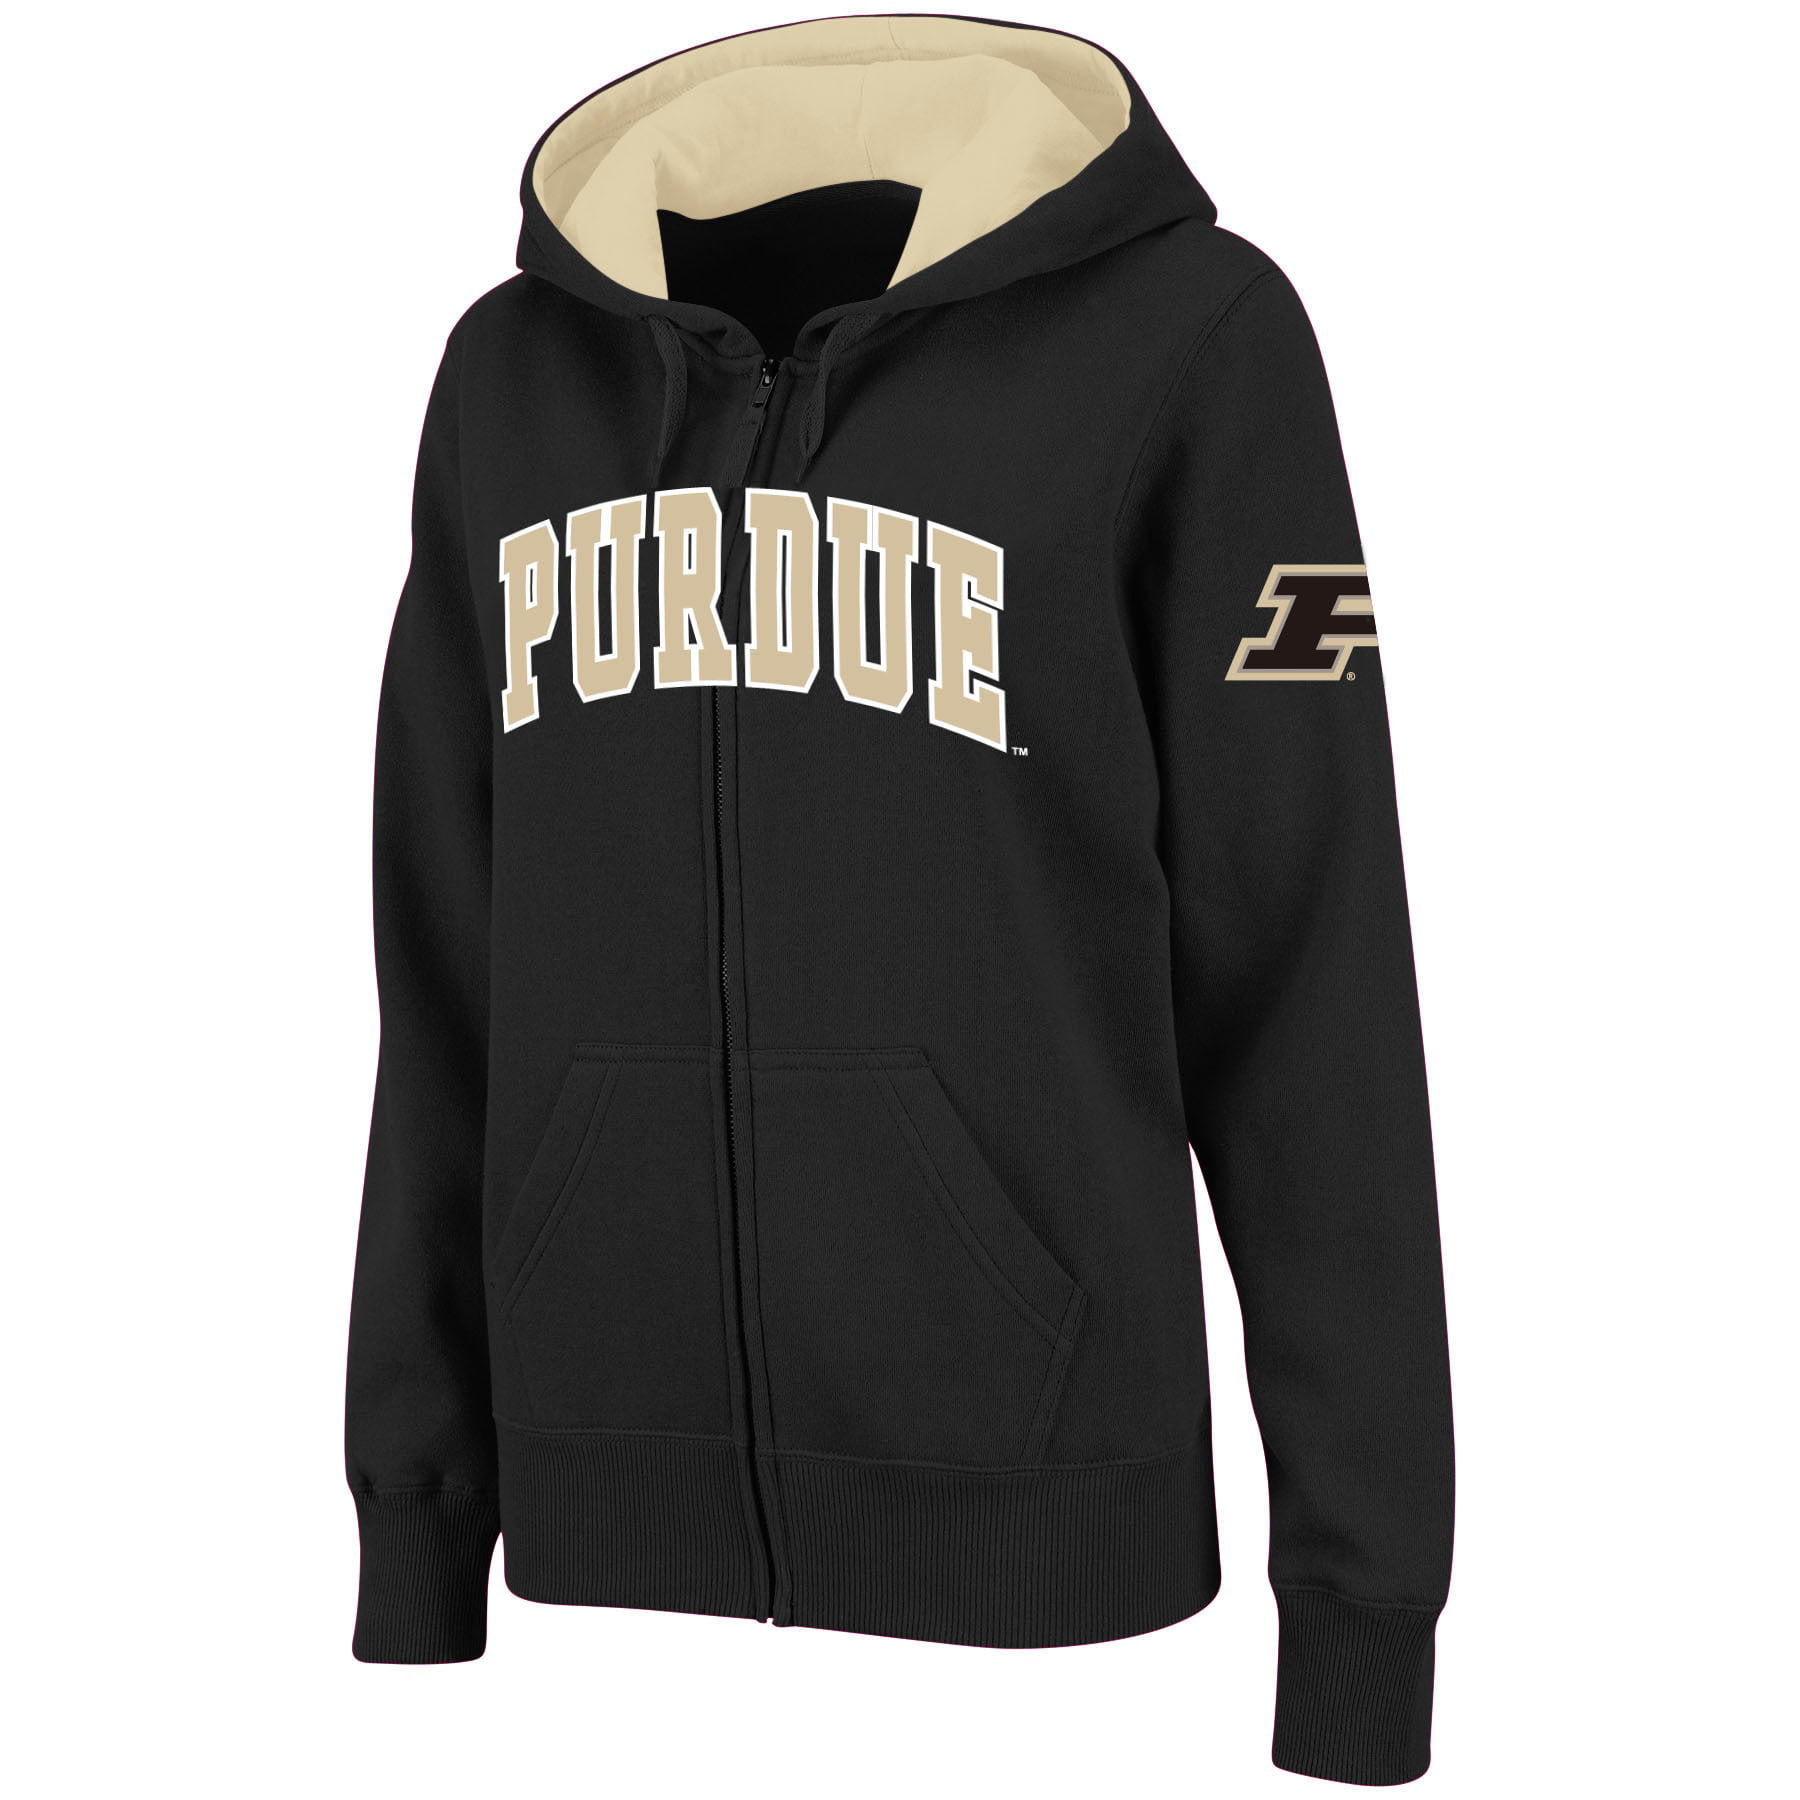 Purdue Boilermakers Stadium Athletic Women's Arched Name Full-Zip ...